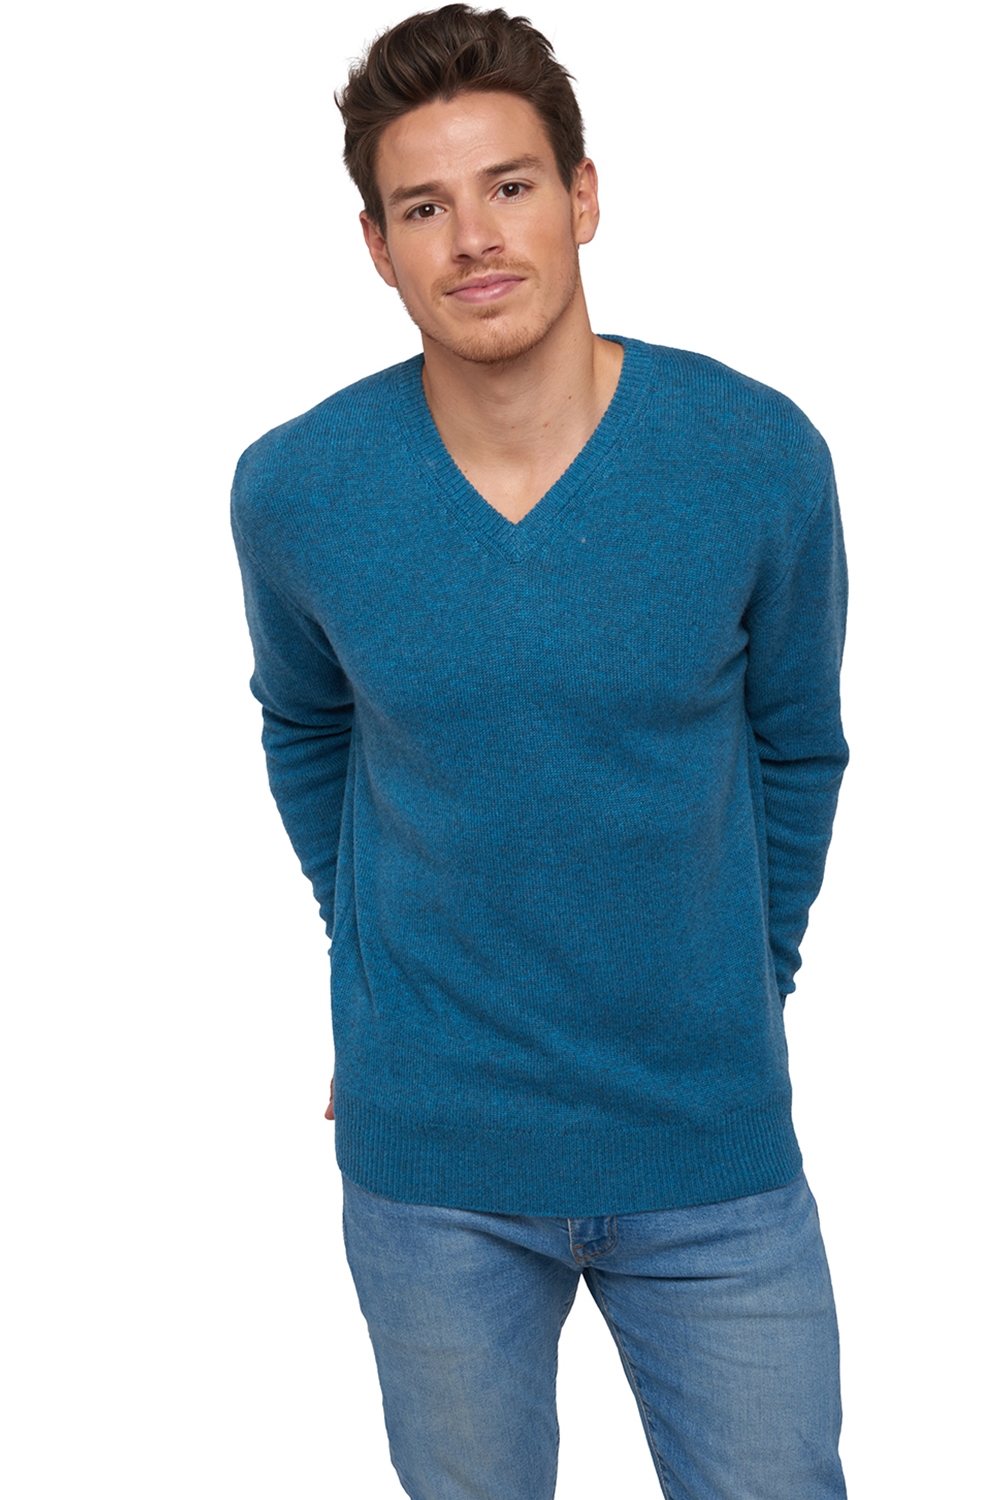 Cachemire pull homme hippolyte 4f manor blue 2xl